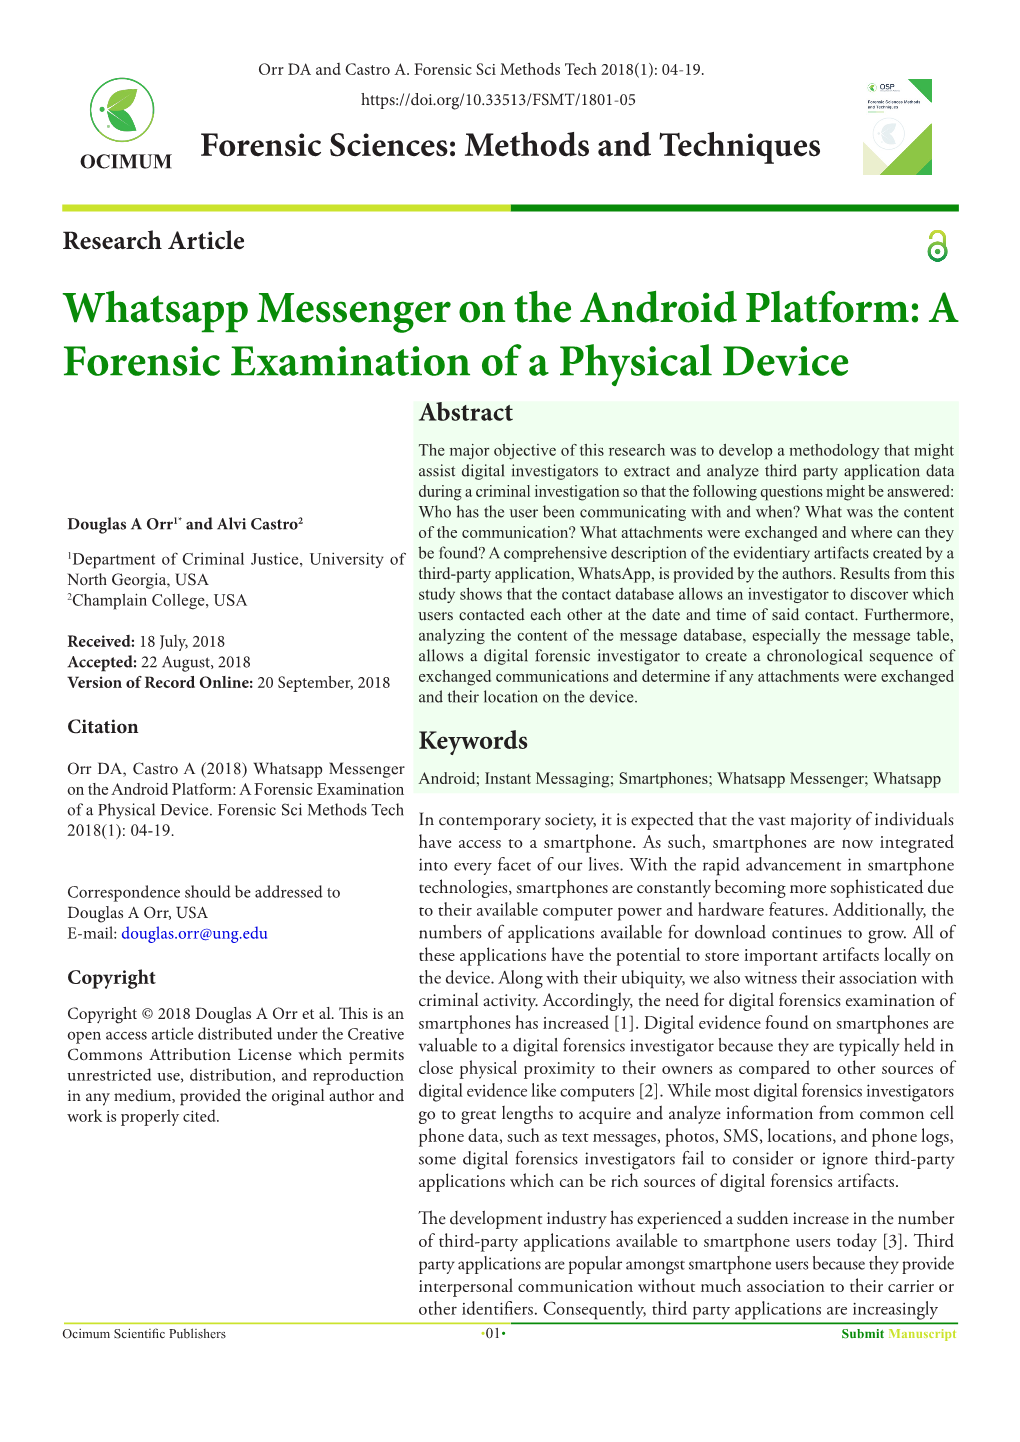 Whatsapp Messenger on the Android Platform: a Forensic Examination of a Physical Device